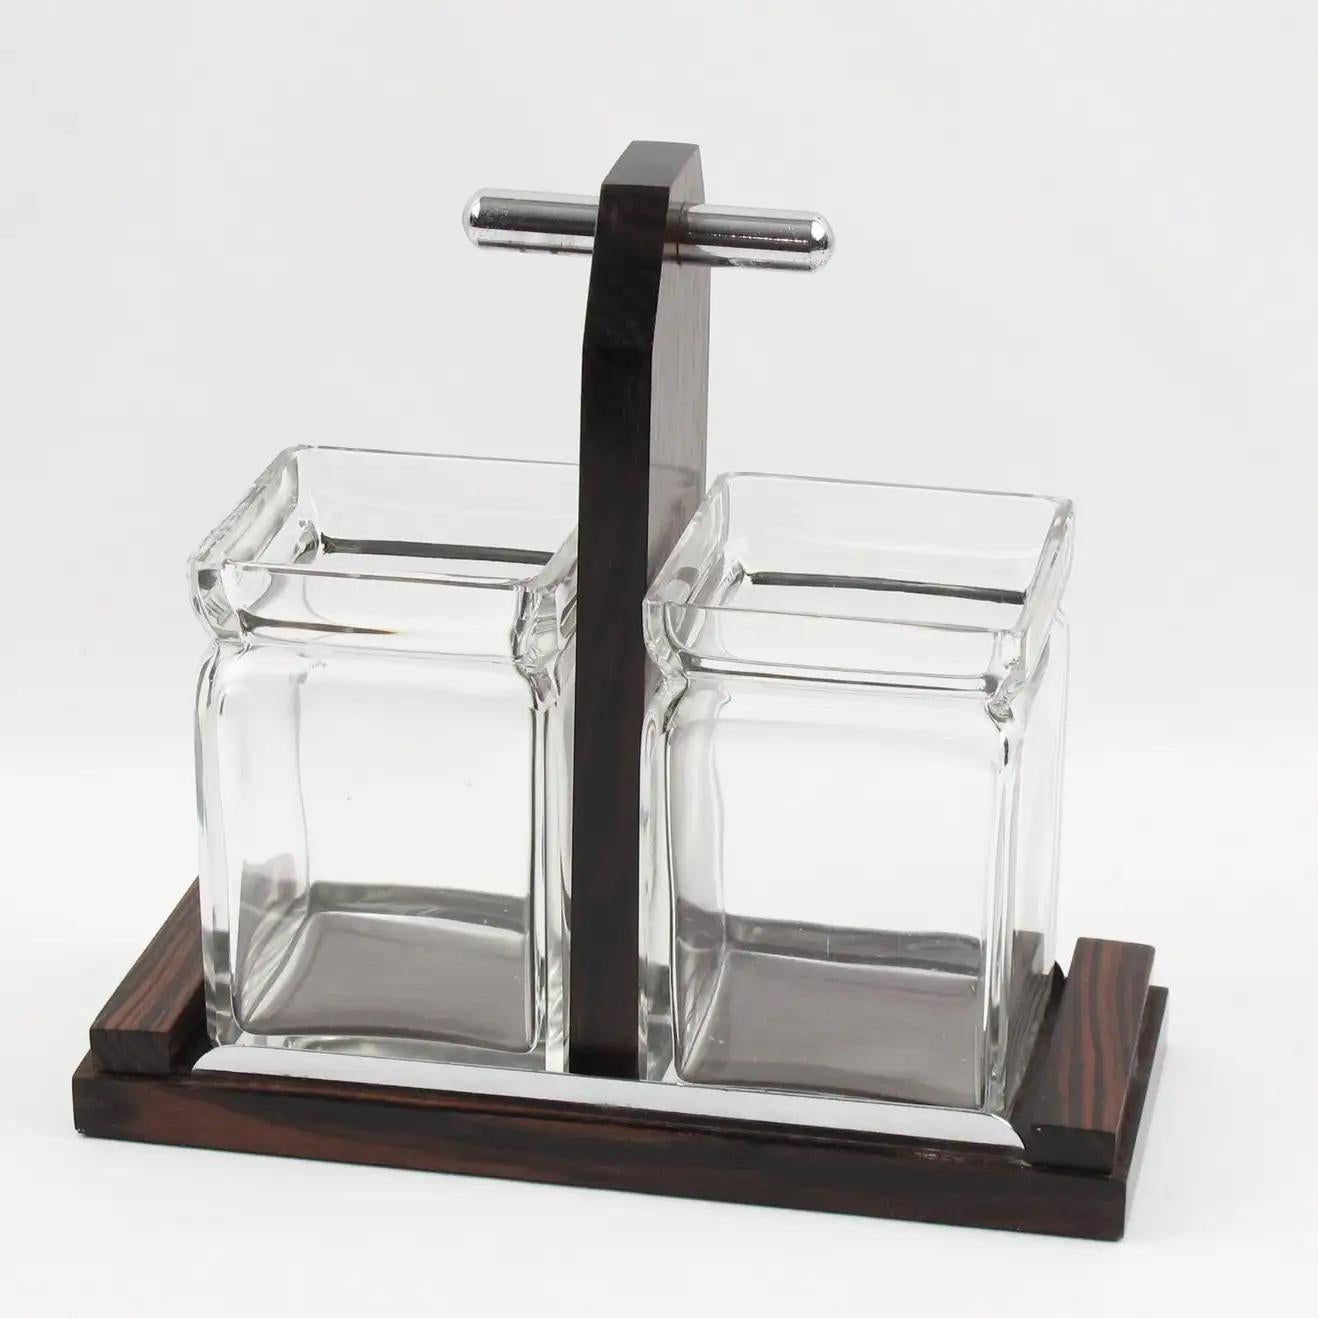 This is a lovely Art Deco tableware preserves, pickles, or condiments set on a stand with crystal jars. The serving set features a modernist design with a Macassar wood and chrome geometric base complimented with a tall handle. There are two